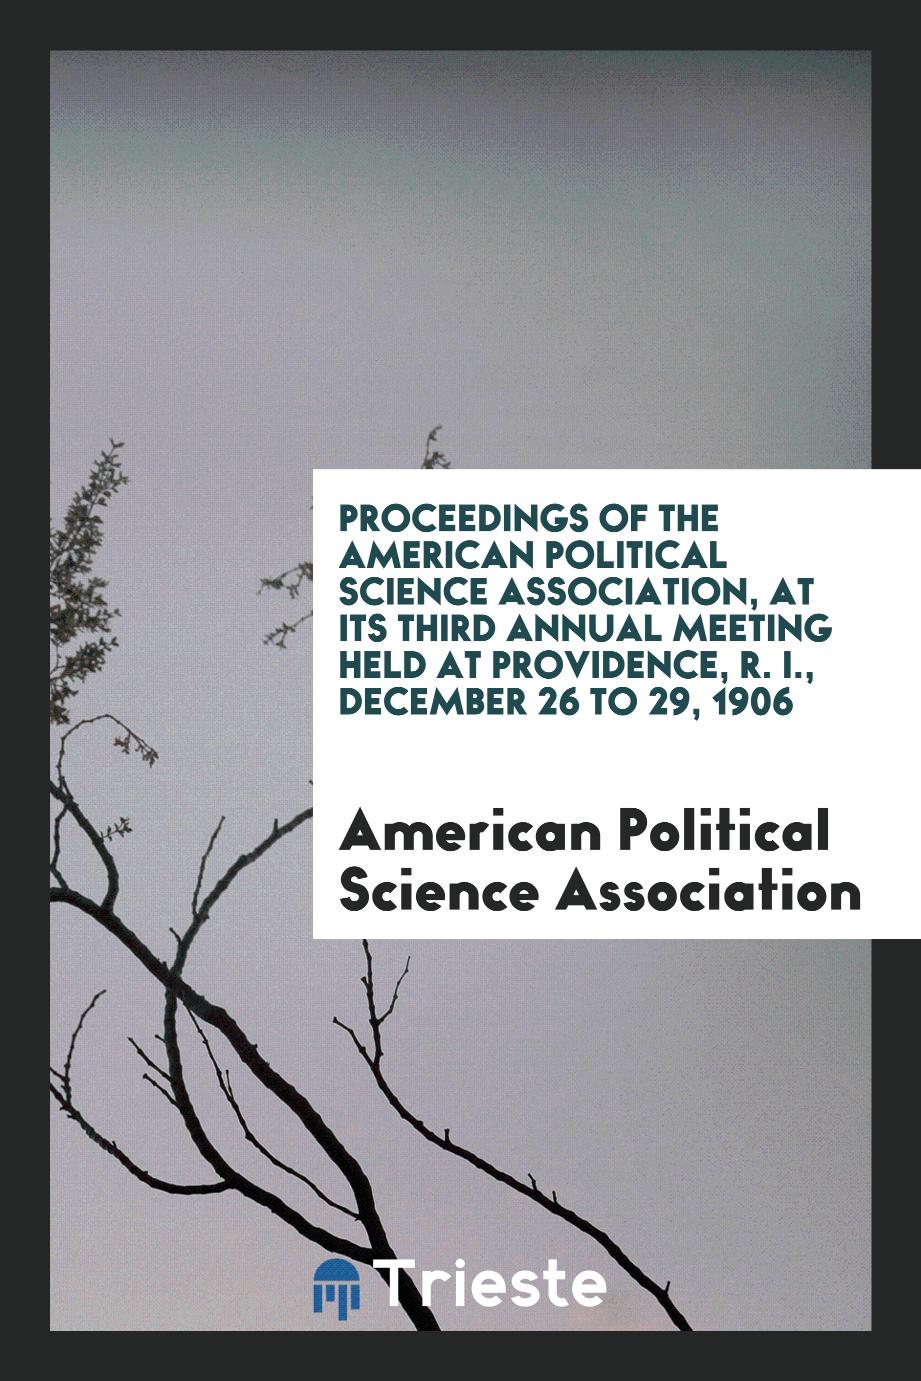 Proceedings of the american political science association, at its third annual meeting held at providence, R. I., December 26 to 29, 1906